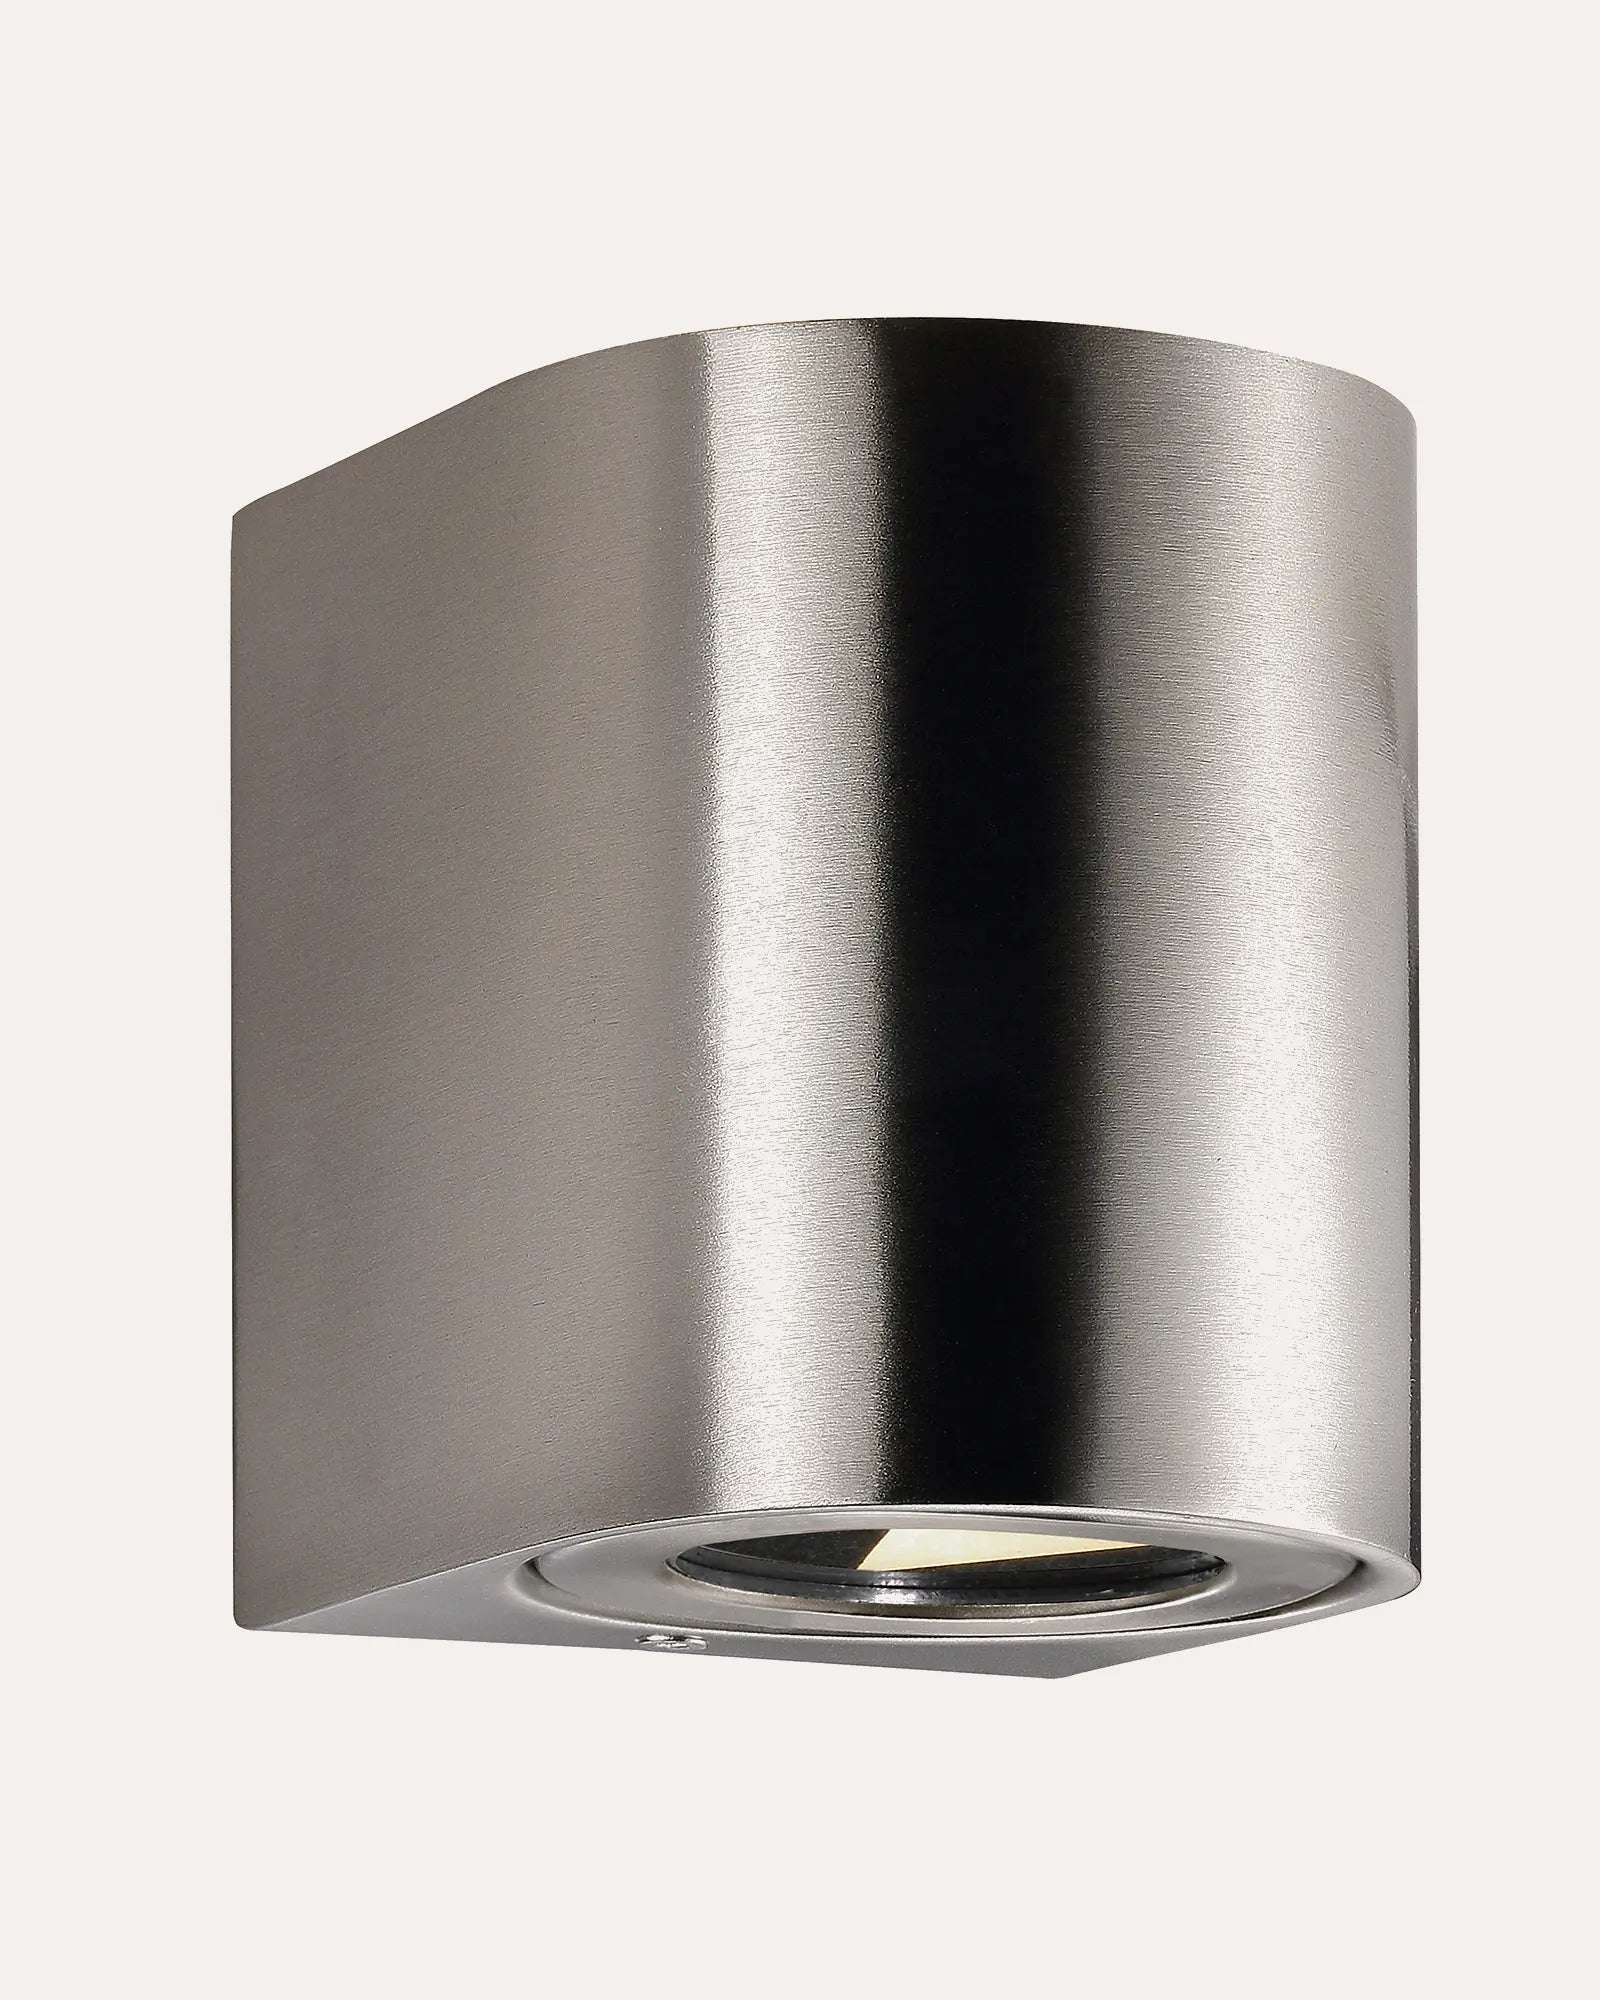 Canto 2 small minimal Scandinavian up and down light stainless